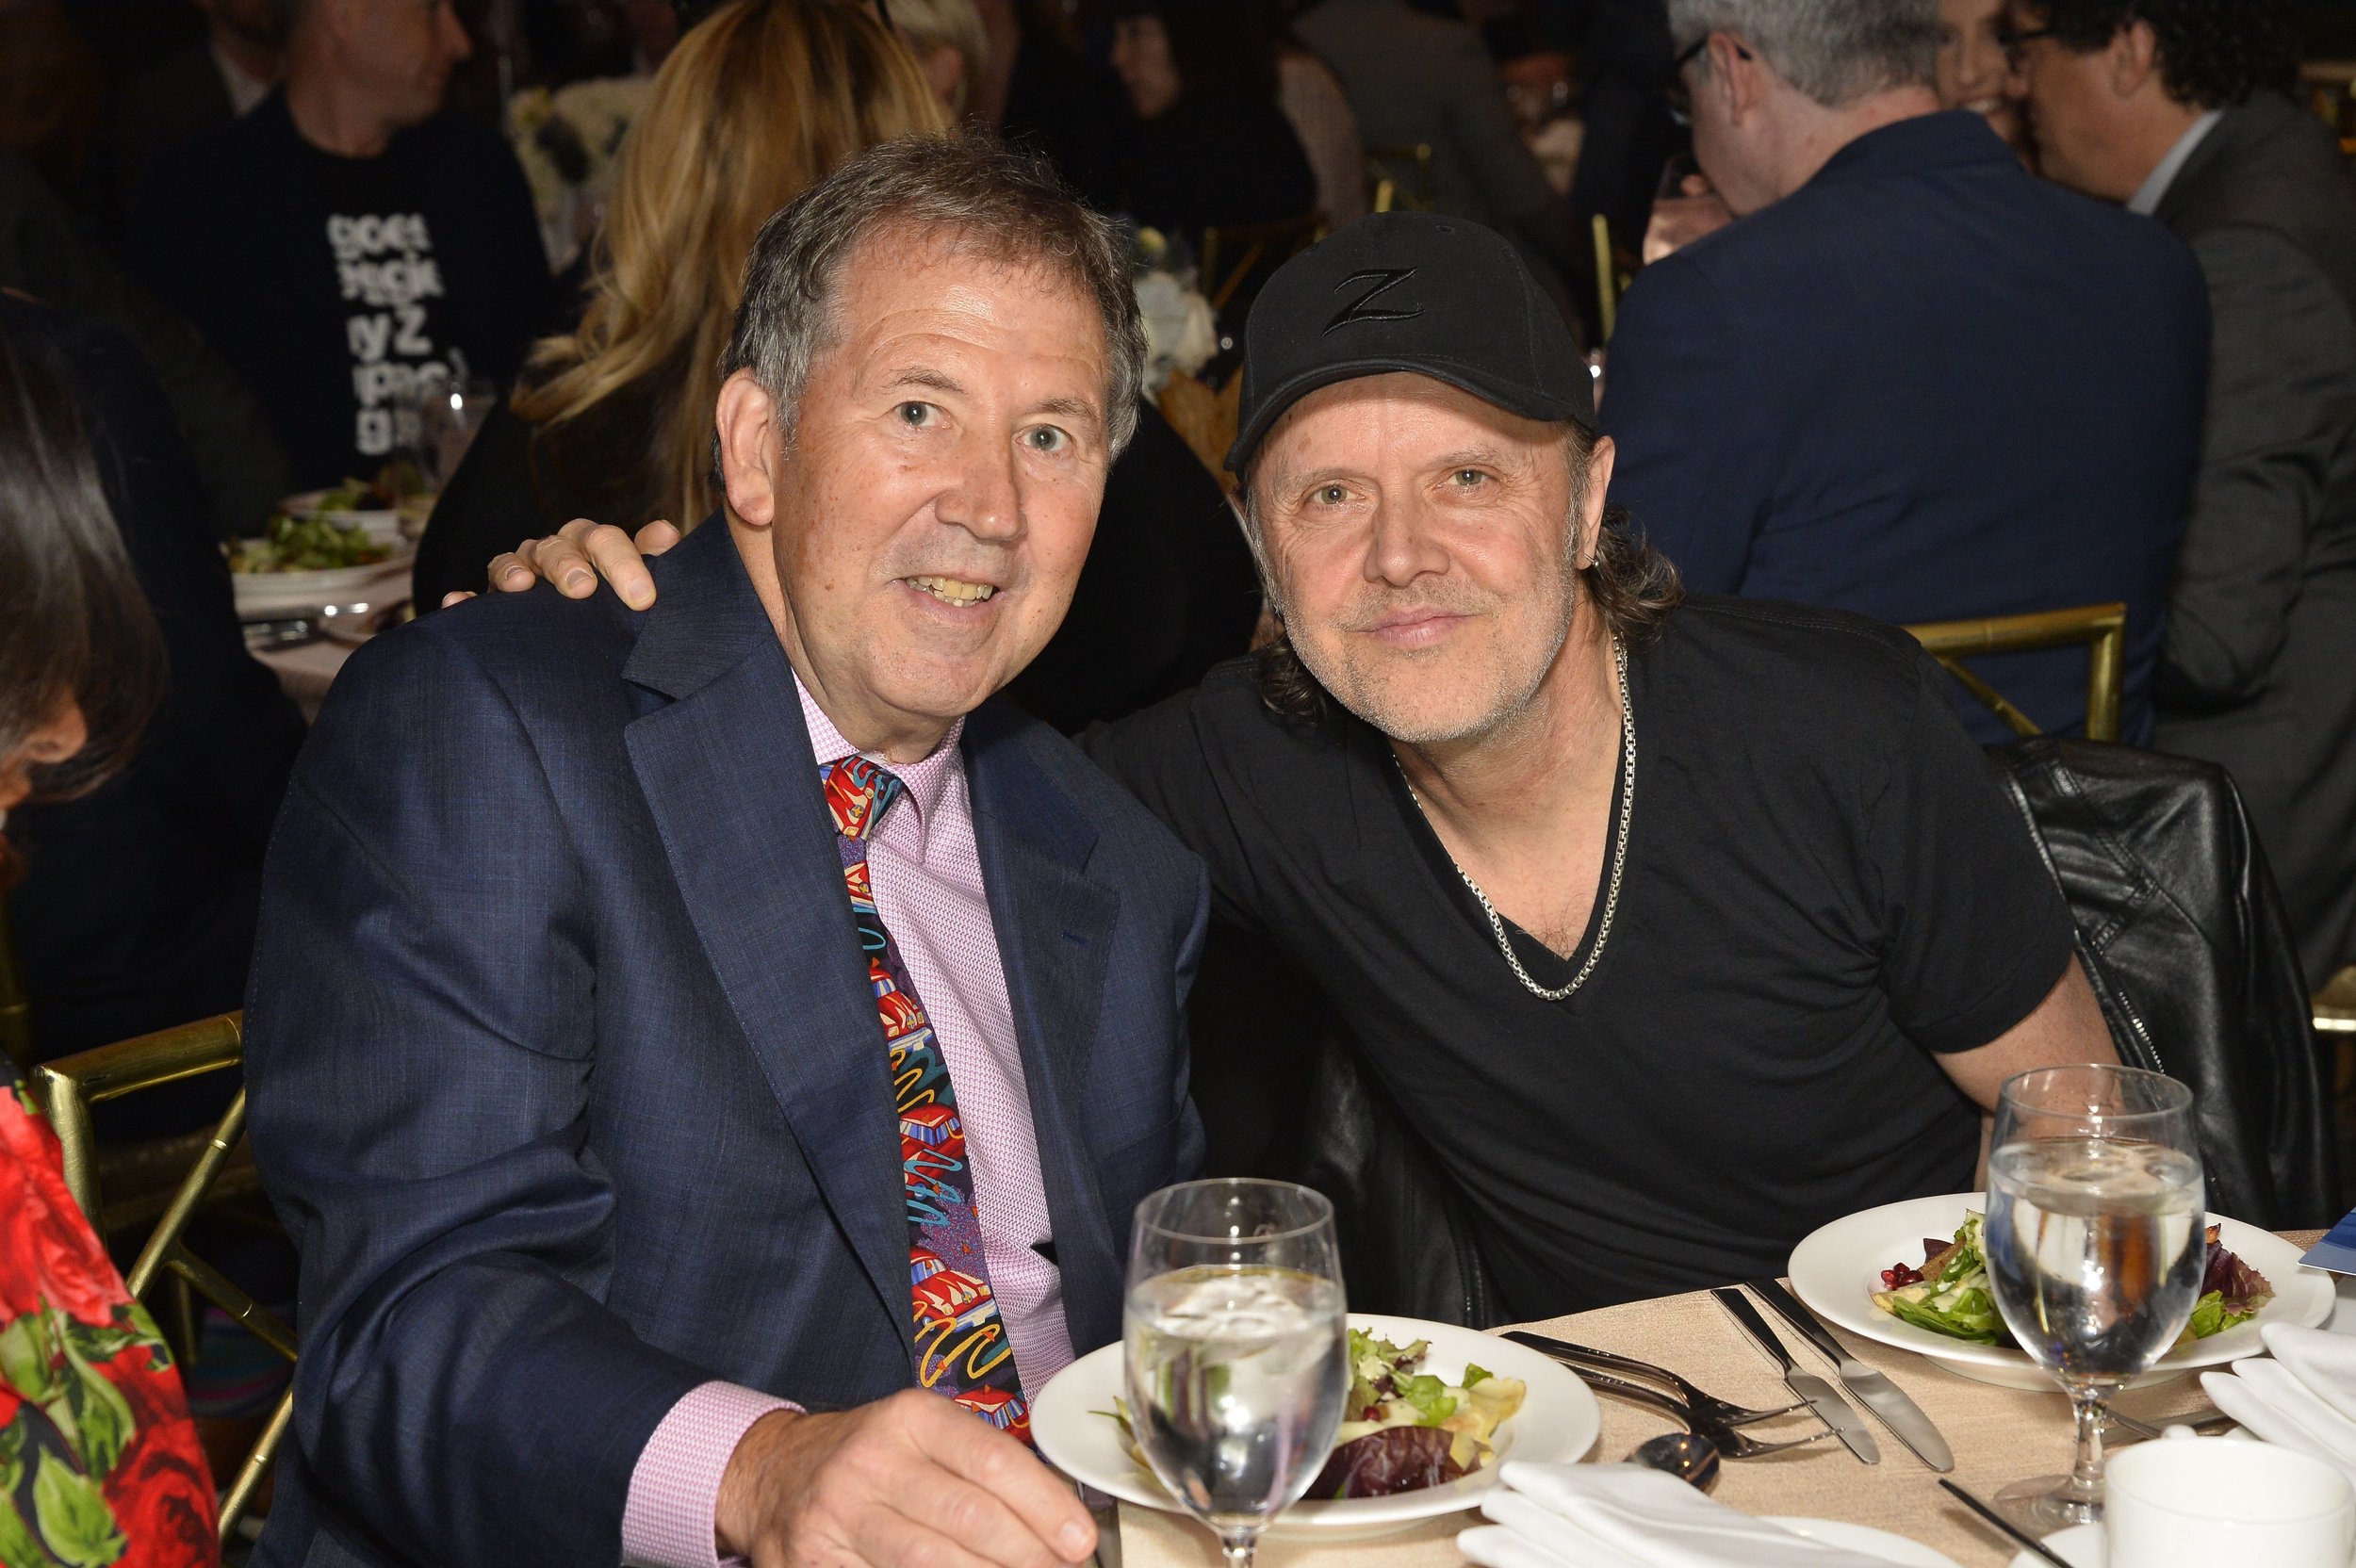  LOS ANGELES, CALIFORNIA - FEBRUARY 03: (L-R) Honoree Peter T. Paterno and Lars Ulrich attend the 25th Annual Entertainment Law Initiative during the 65th GRAMMY Awards on February 03, 2023 in Los Angeles, California. (Photo by Jerod Harris/Getty Ima